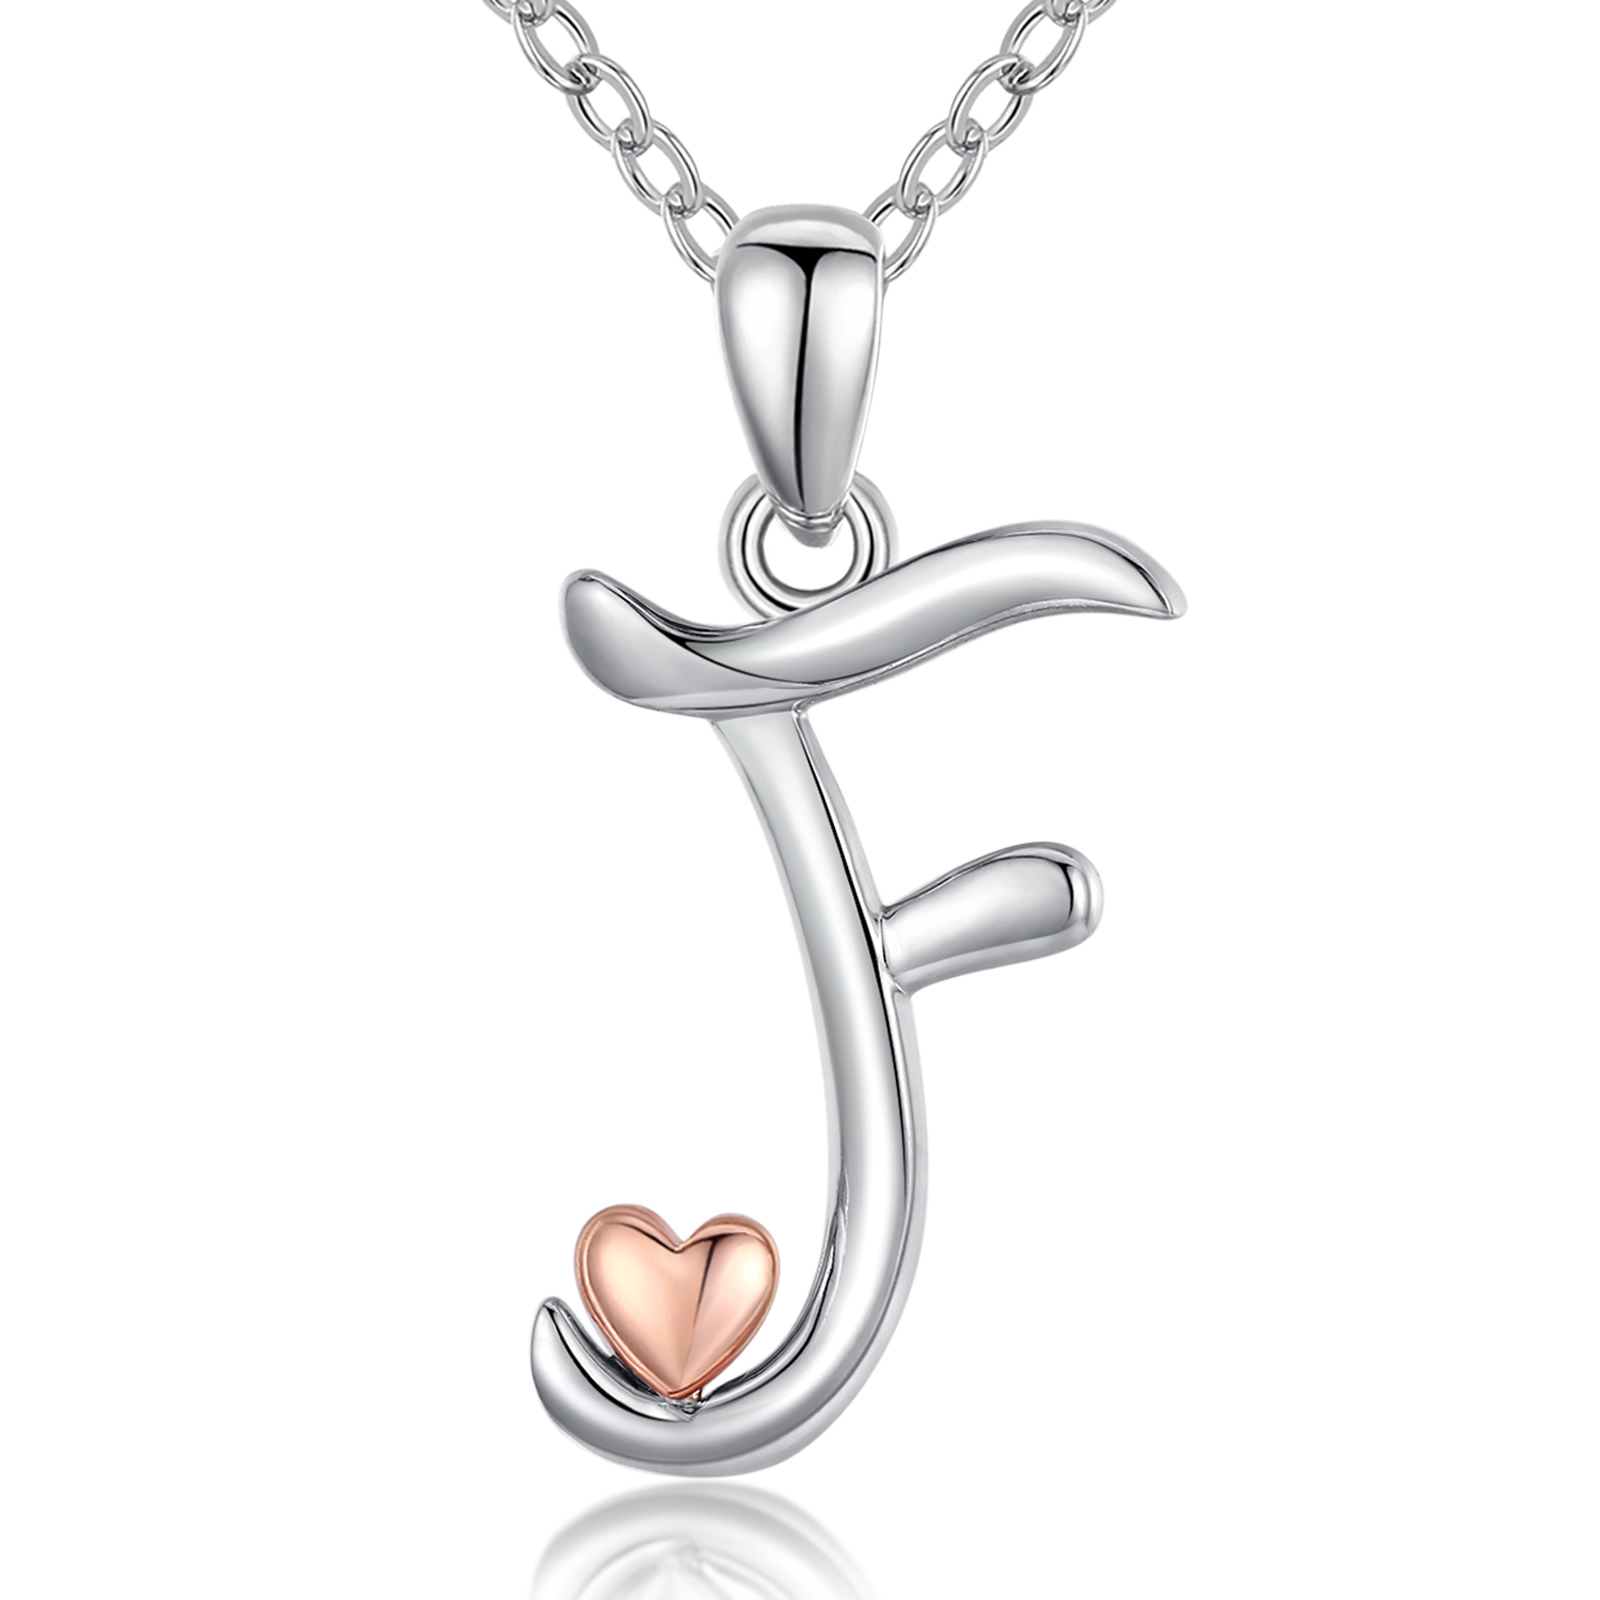 Merryshine Jewelry fashion s925 sterling silver plated rhodium letter F initial necklace